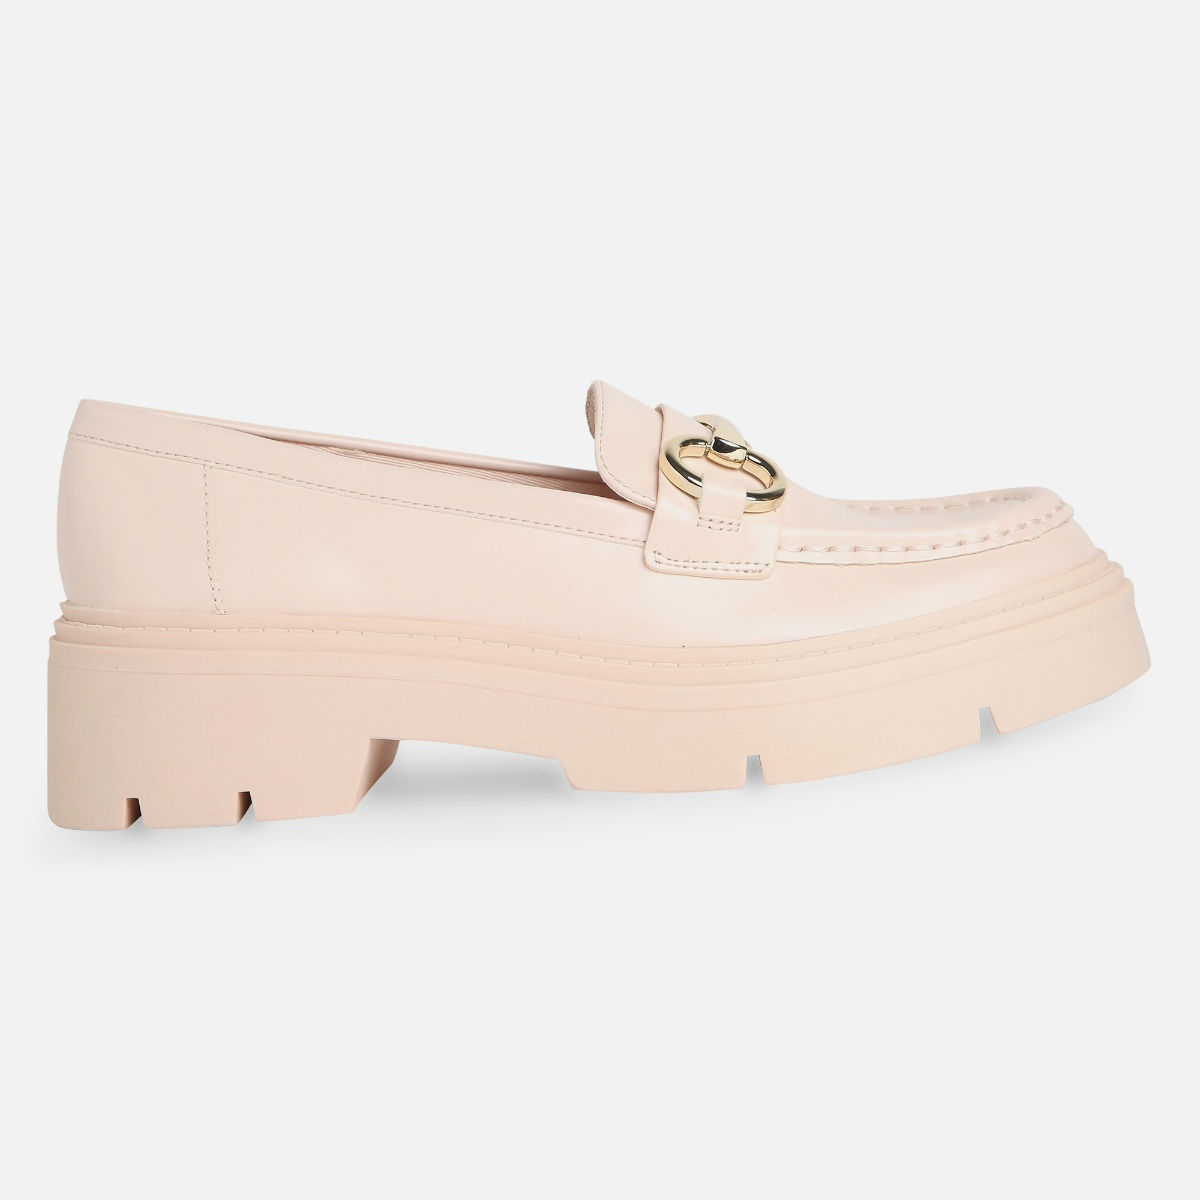 Aldo Miska Synthetic Pink Solid Loafers: Buy Aldo Miska Synthetic Pink ...